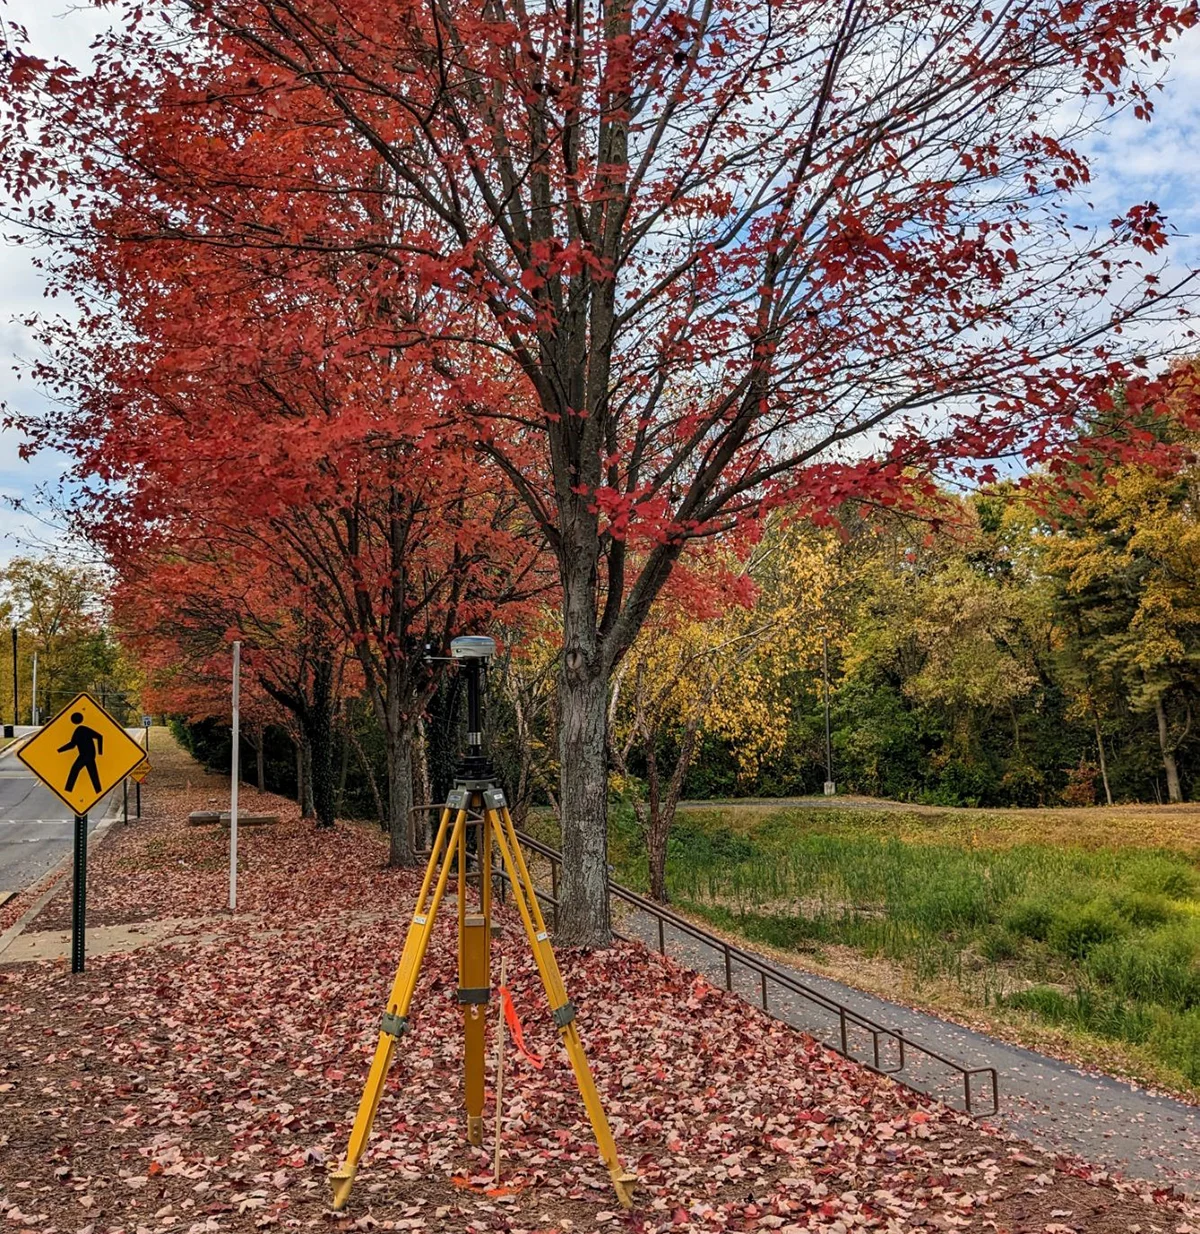 A survey mapping camera on a tripod sitting on a city sidewalk in front of a maple tree in autumn, the orange and red fallen leaves cover the ground.